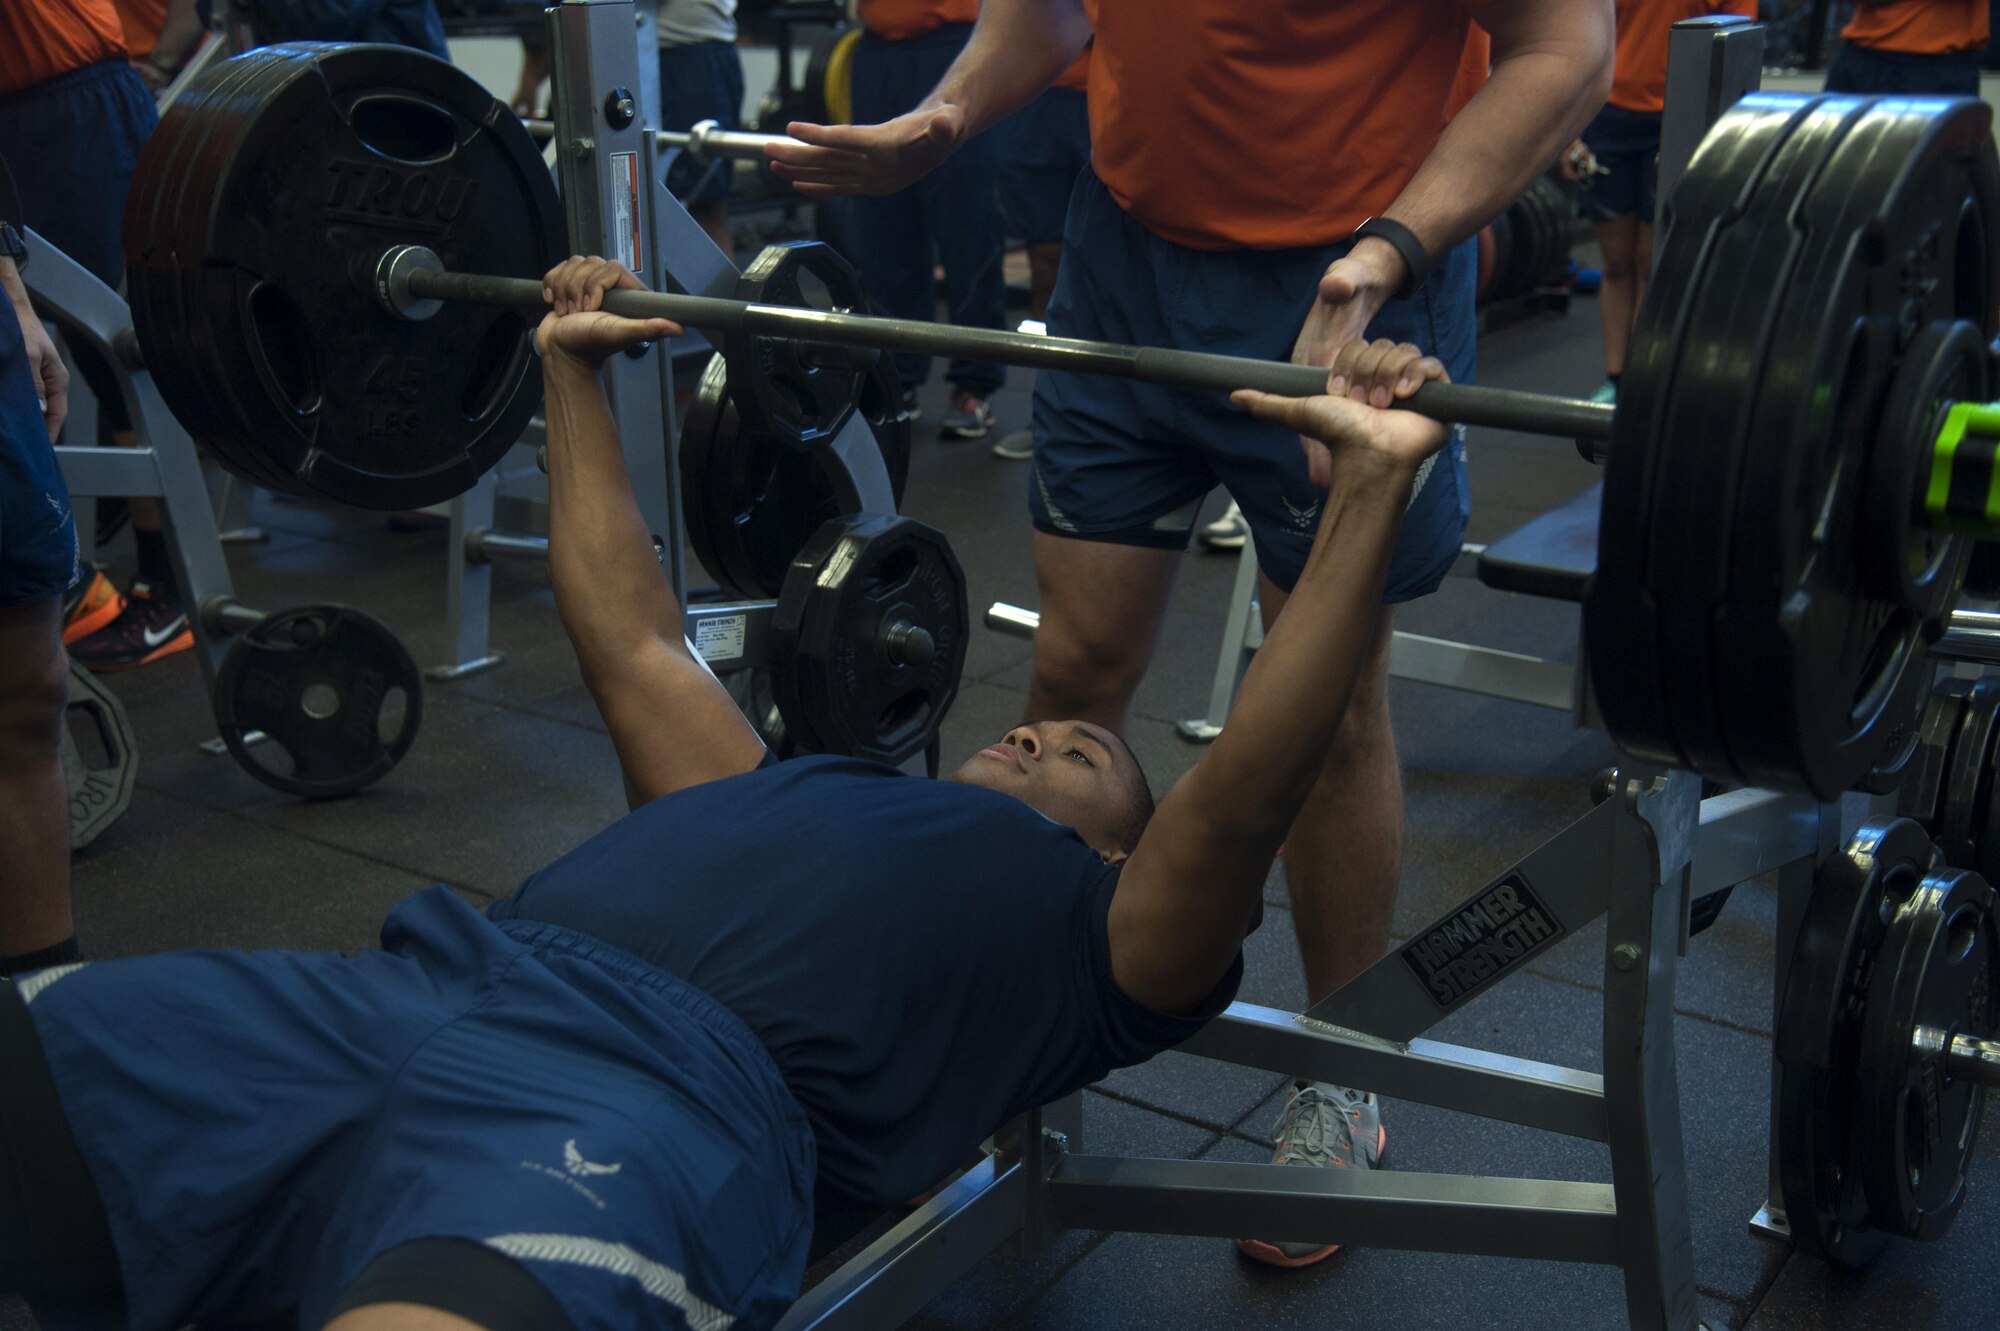 A member of Team MacDill maxes out on the bench press during the weight lifting portion of the 4th annual 5k and weight lifting competition to honor Maj. Raymond Estelle at MacDill Air Force Base, Fla., Jan. 13, 2017. After a 5k run, Airmen gathered inside the fitness center to see who could lift the most weight. (U.S. Air Force photo by Airman 1st Class Rito Smith) 